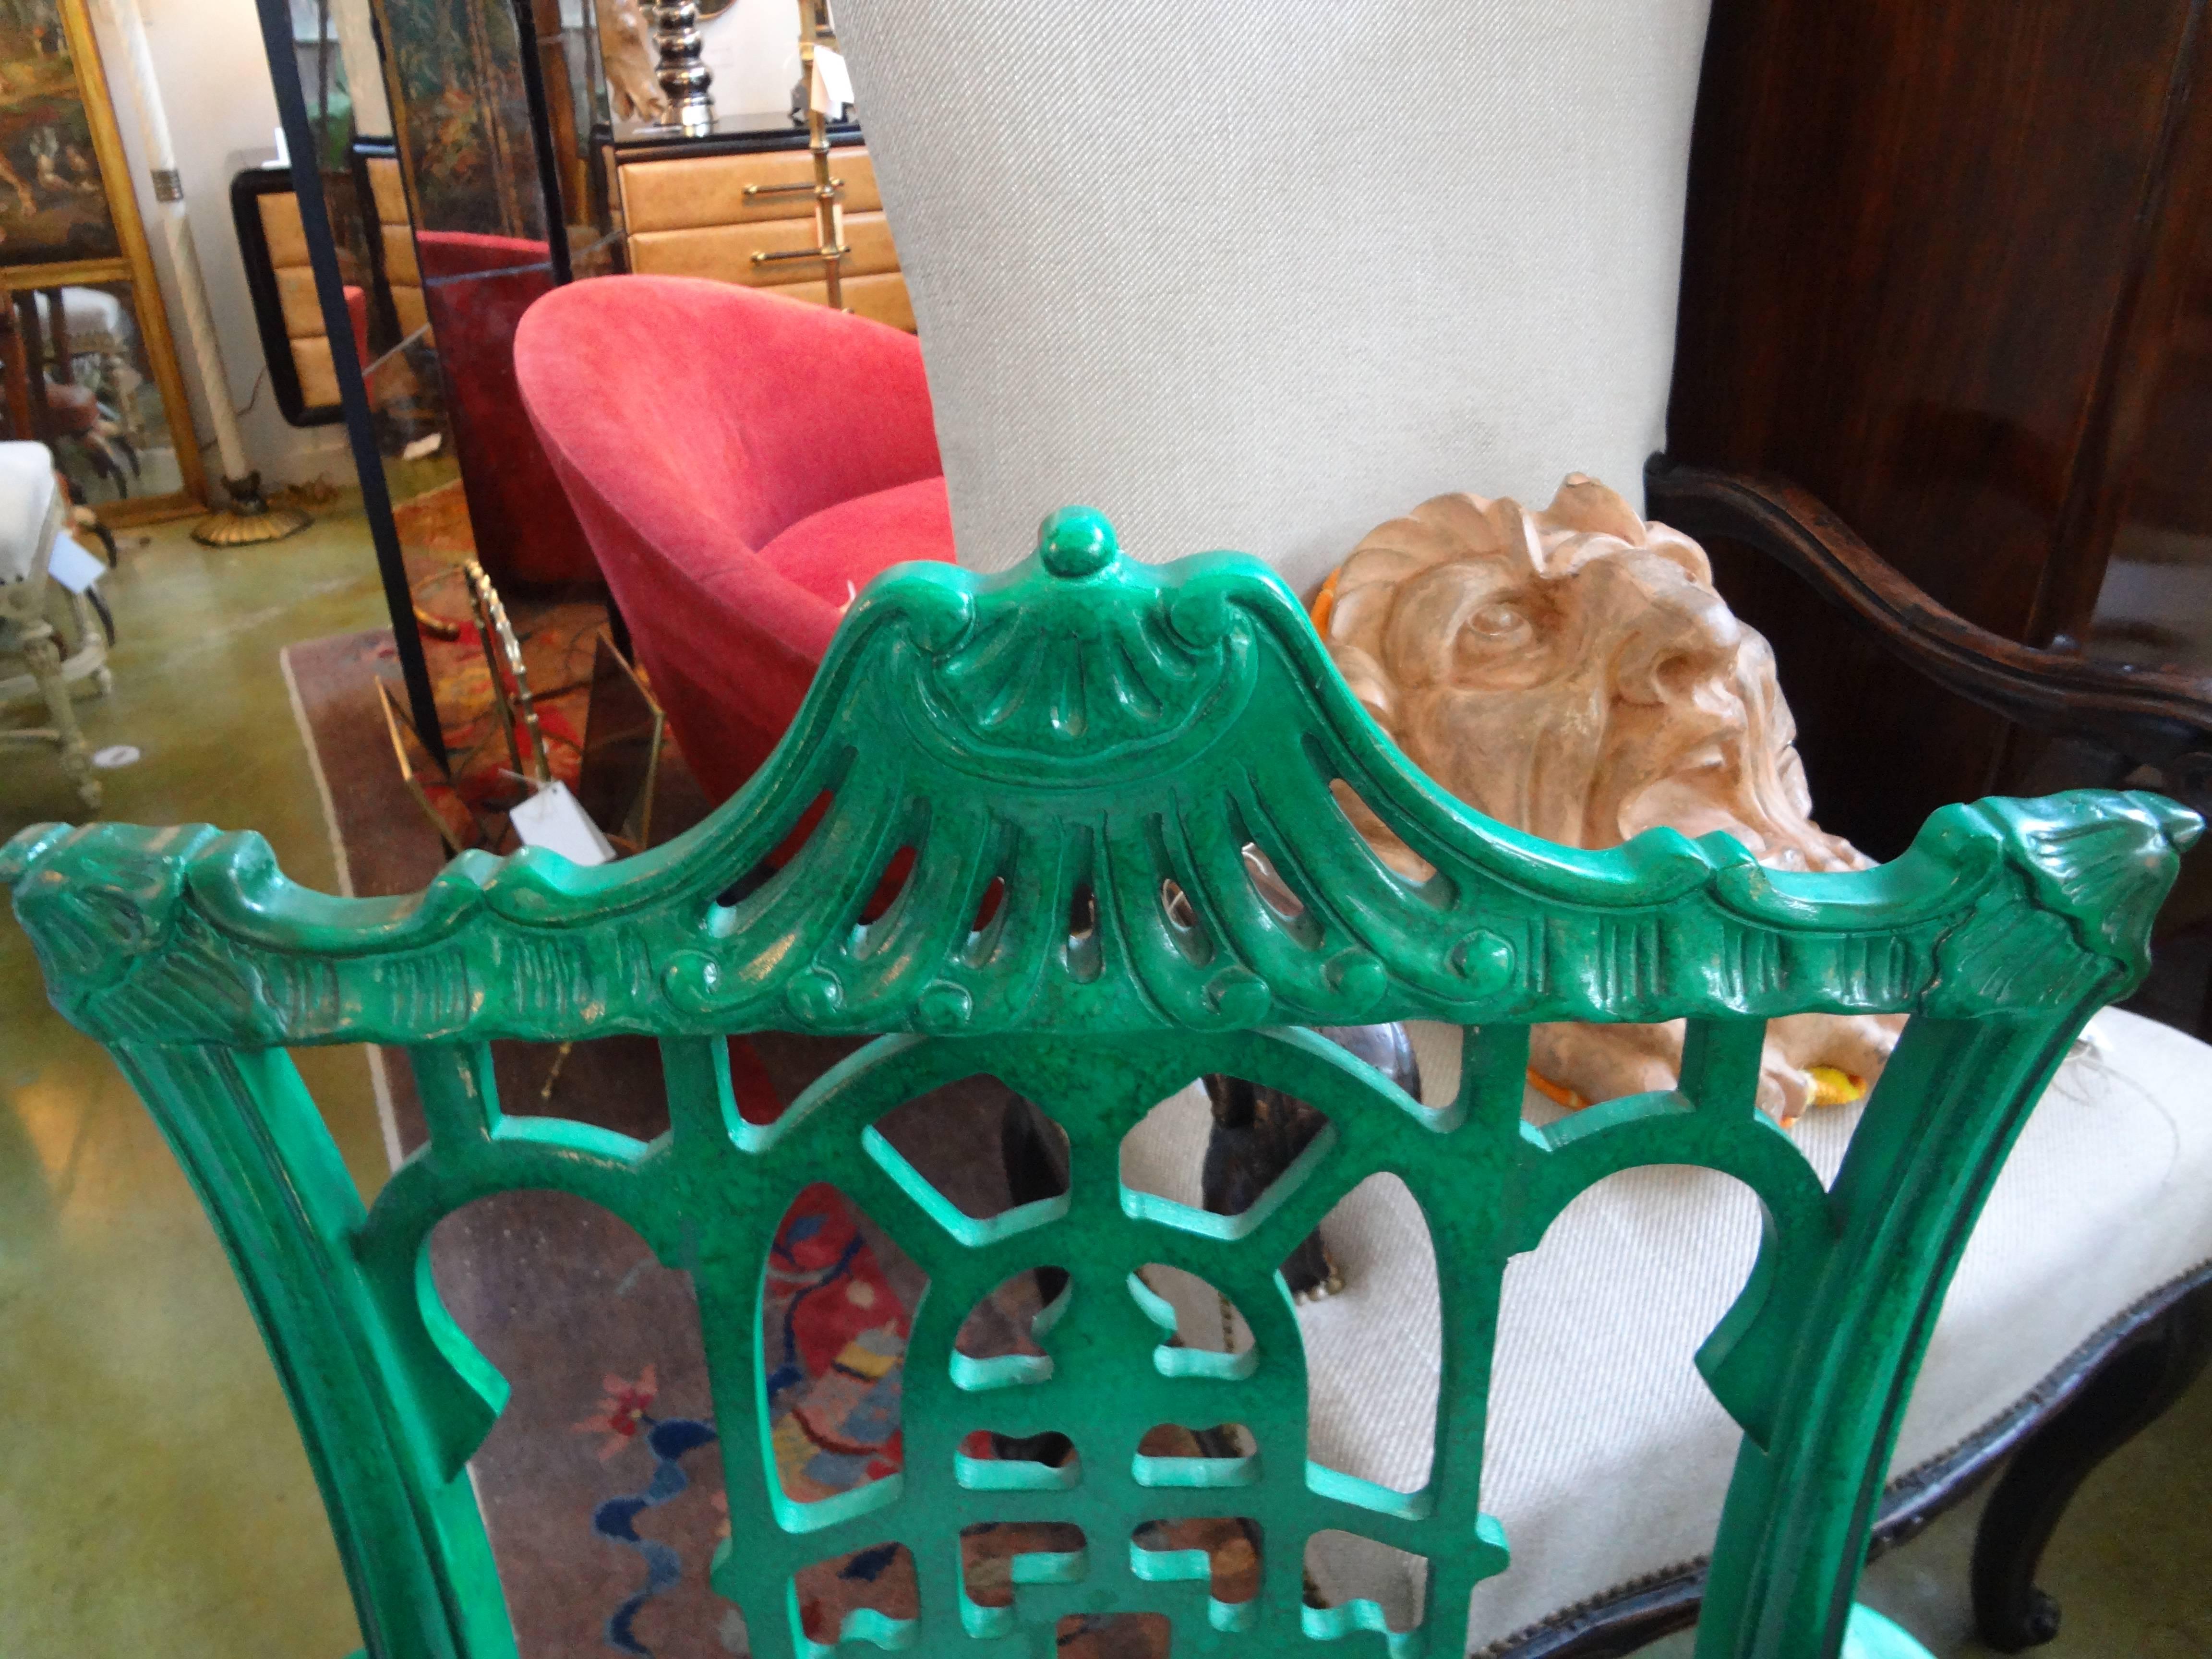 Pair of Chinese Chippendale Style Chairs In a Gorgeous Green Painted Finish. This Pair Has Beautiful Detailing And Have Been Newly Upholstered In a White Linen Fabric. These Armchairs or Side Chairs Are Truly Hollywood Regency Glamour!